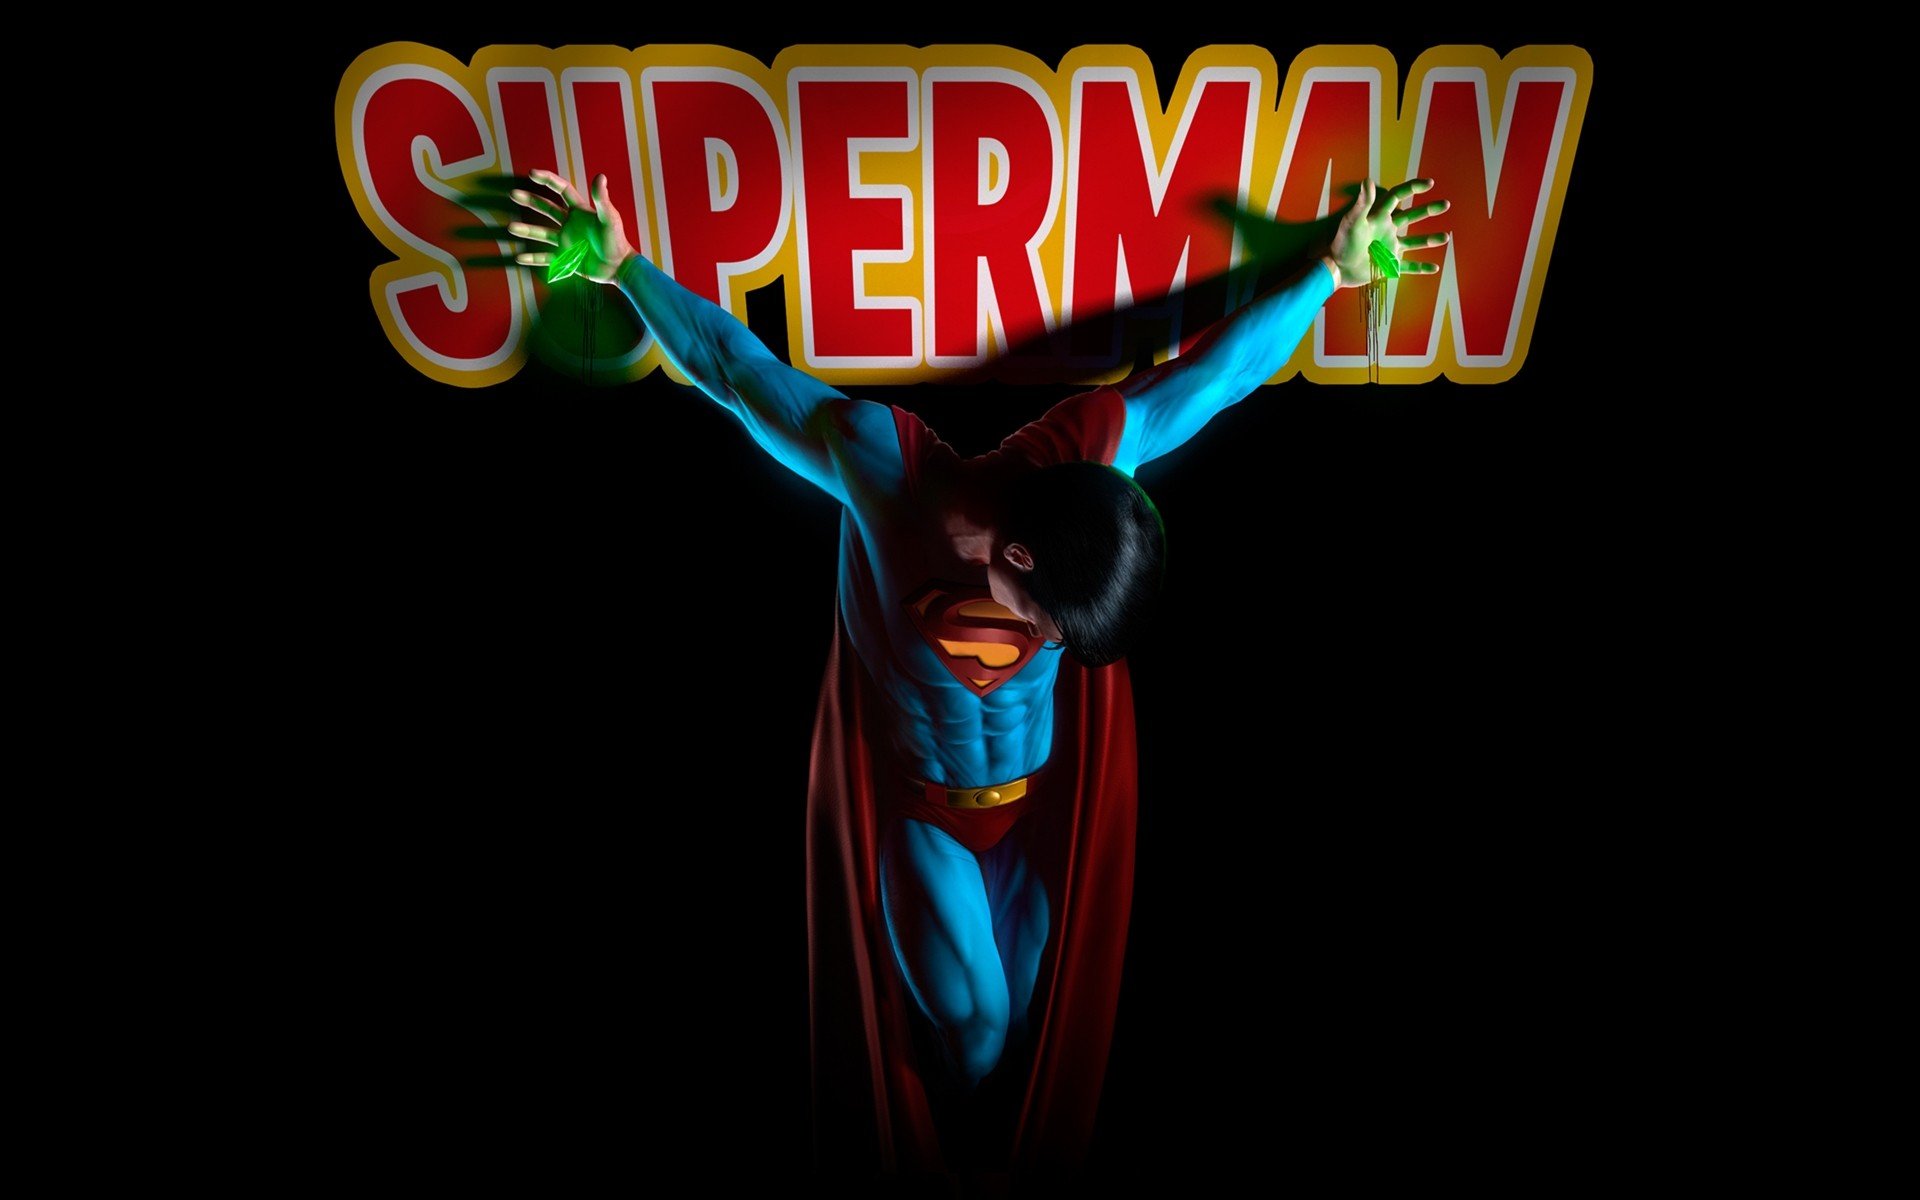  Superman superheroes black background crucified wallpaper background 1920x1200